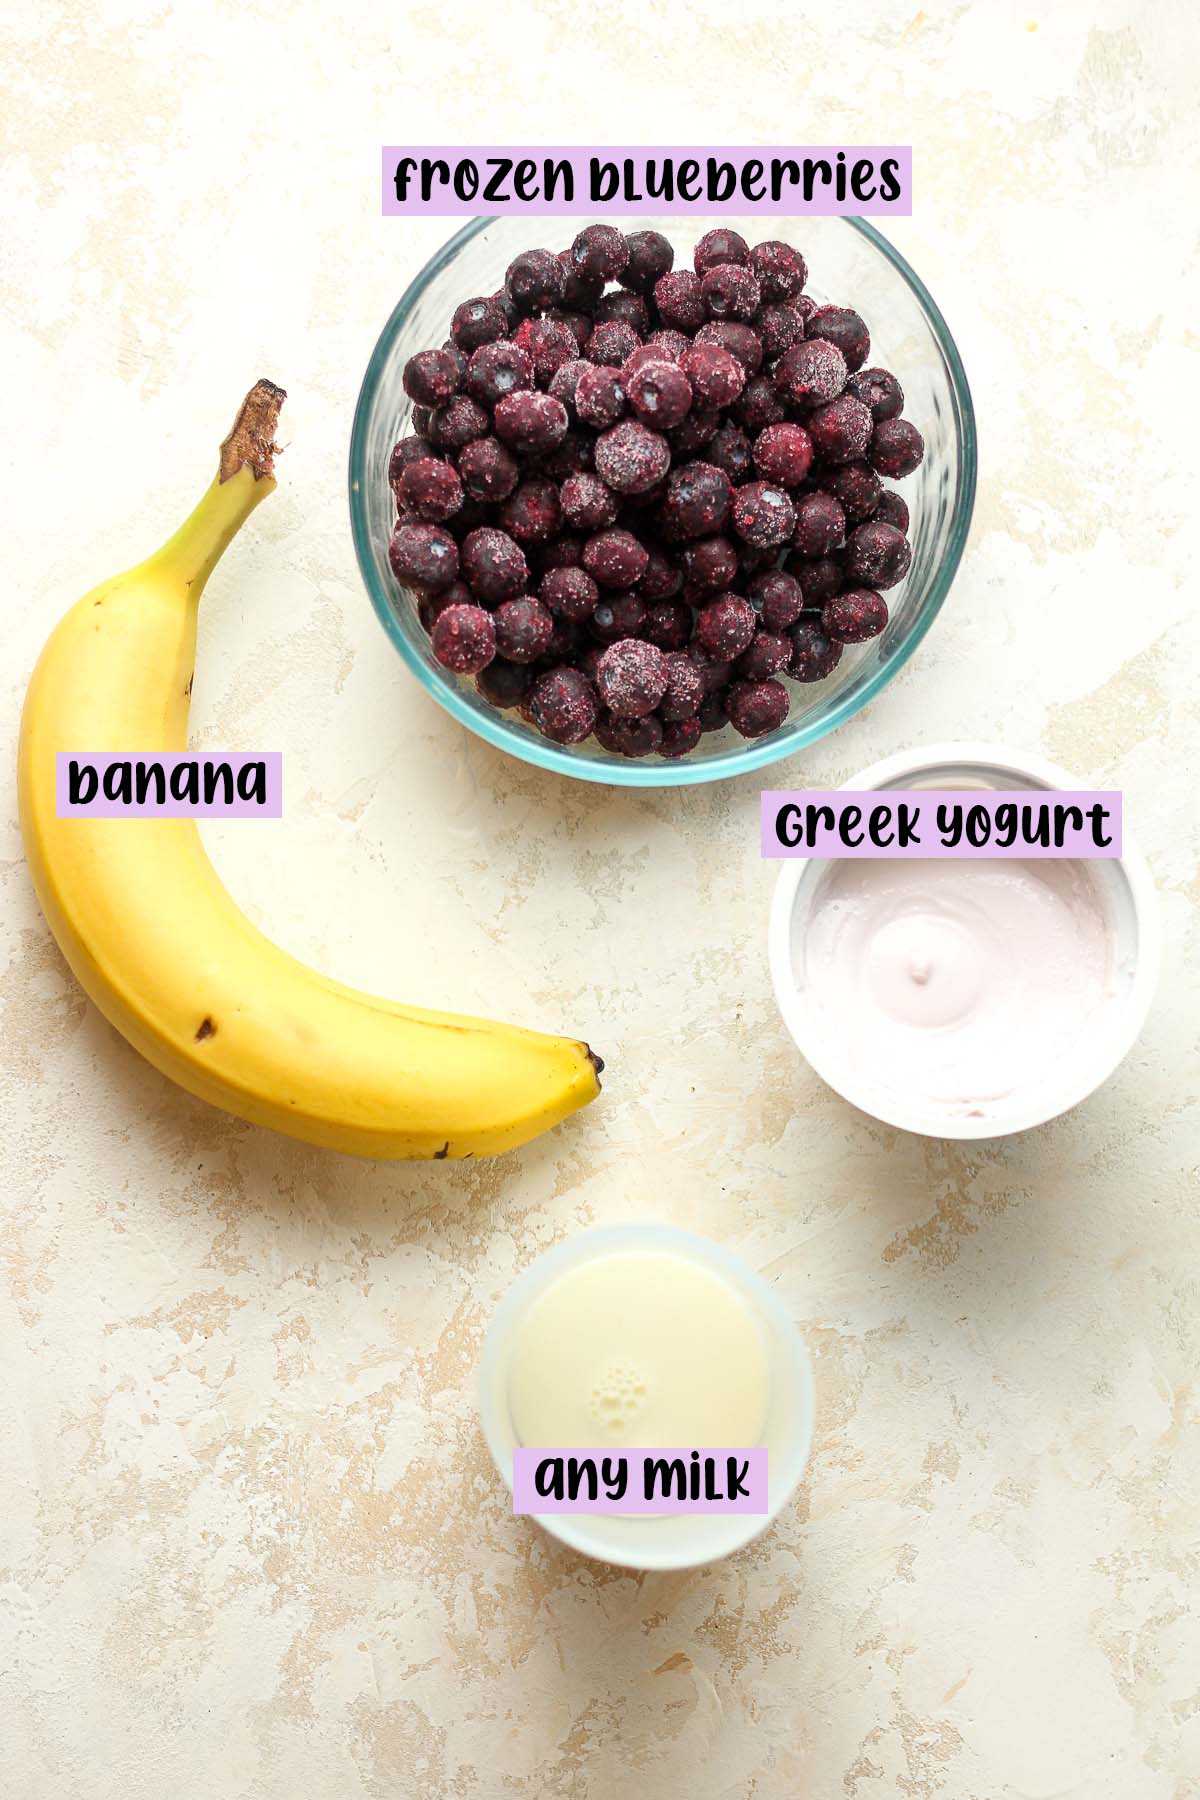 The ingredients for blueberry smoothie bowls.